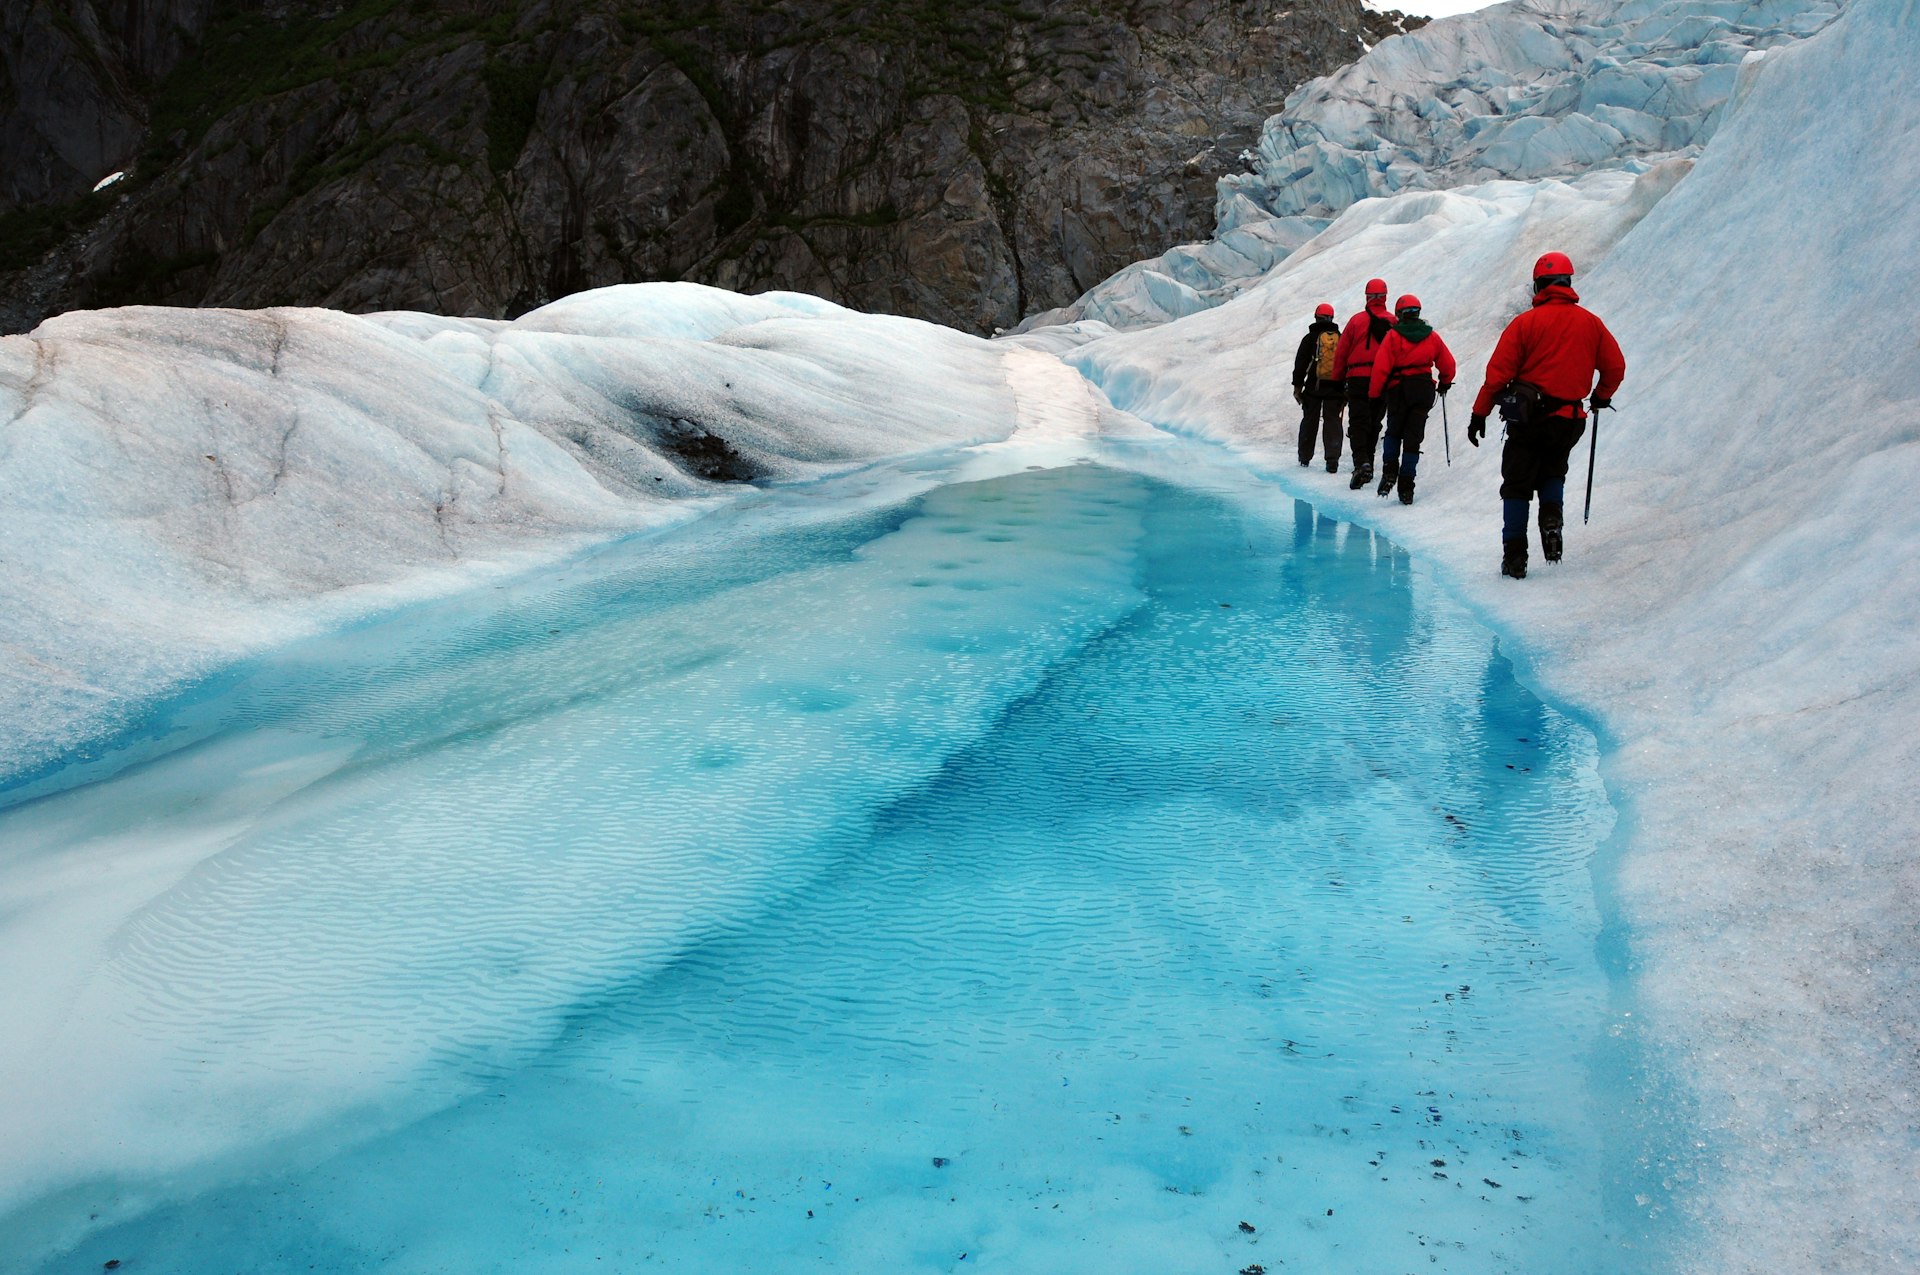 A group of hikers walk across a glacier near a pool of glacial meltwater